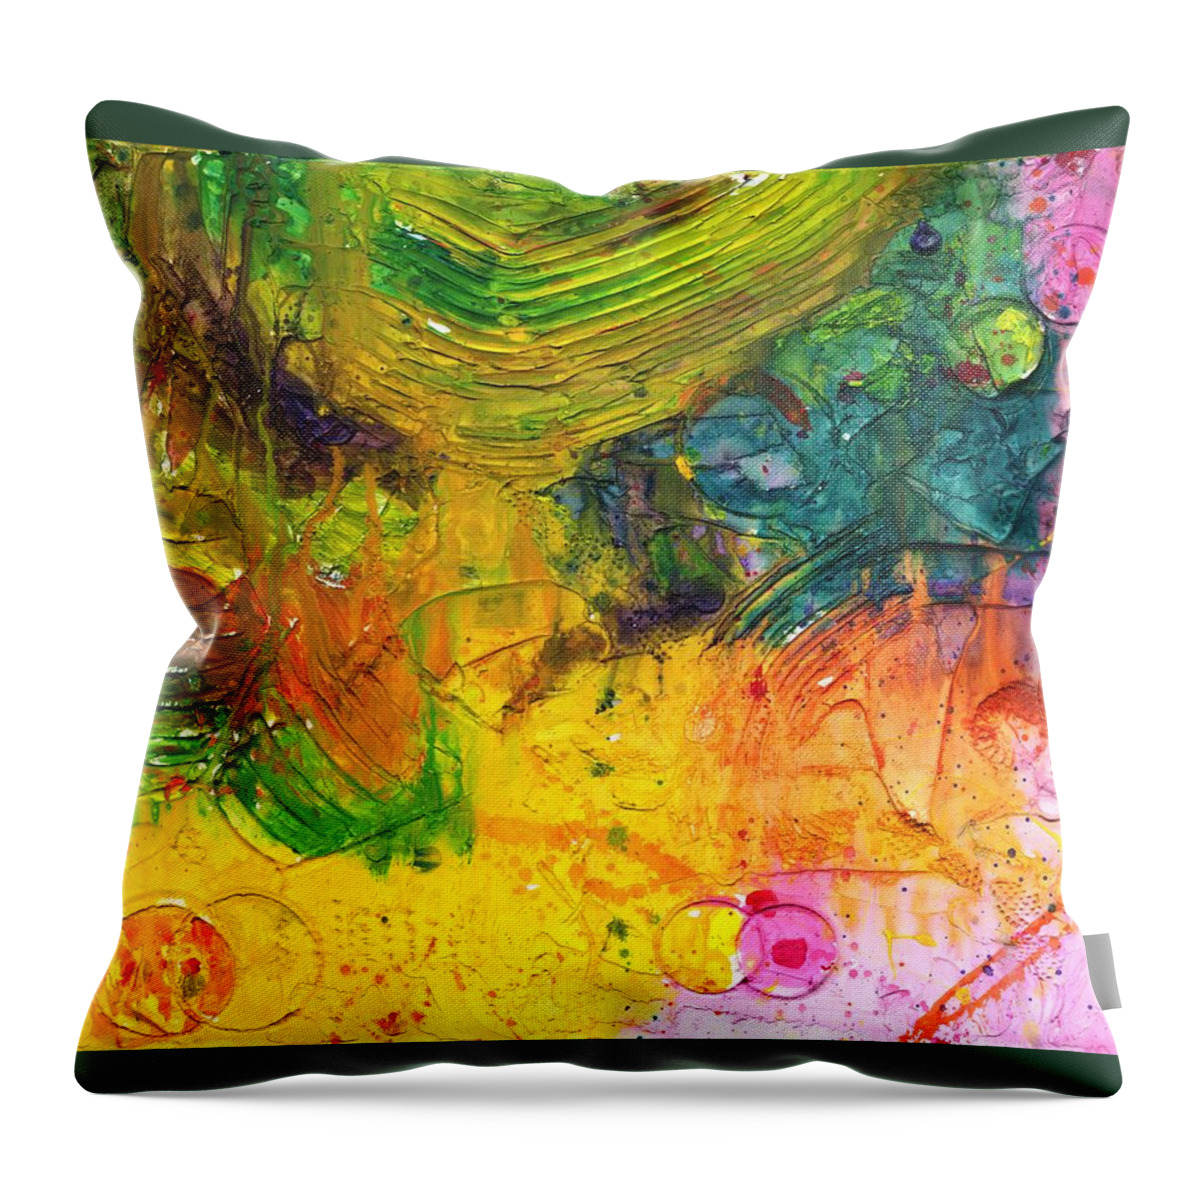 Sanctuary Throw Pillow featuring the painting Sanctuary by Phil Strang